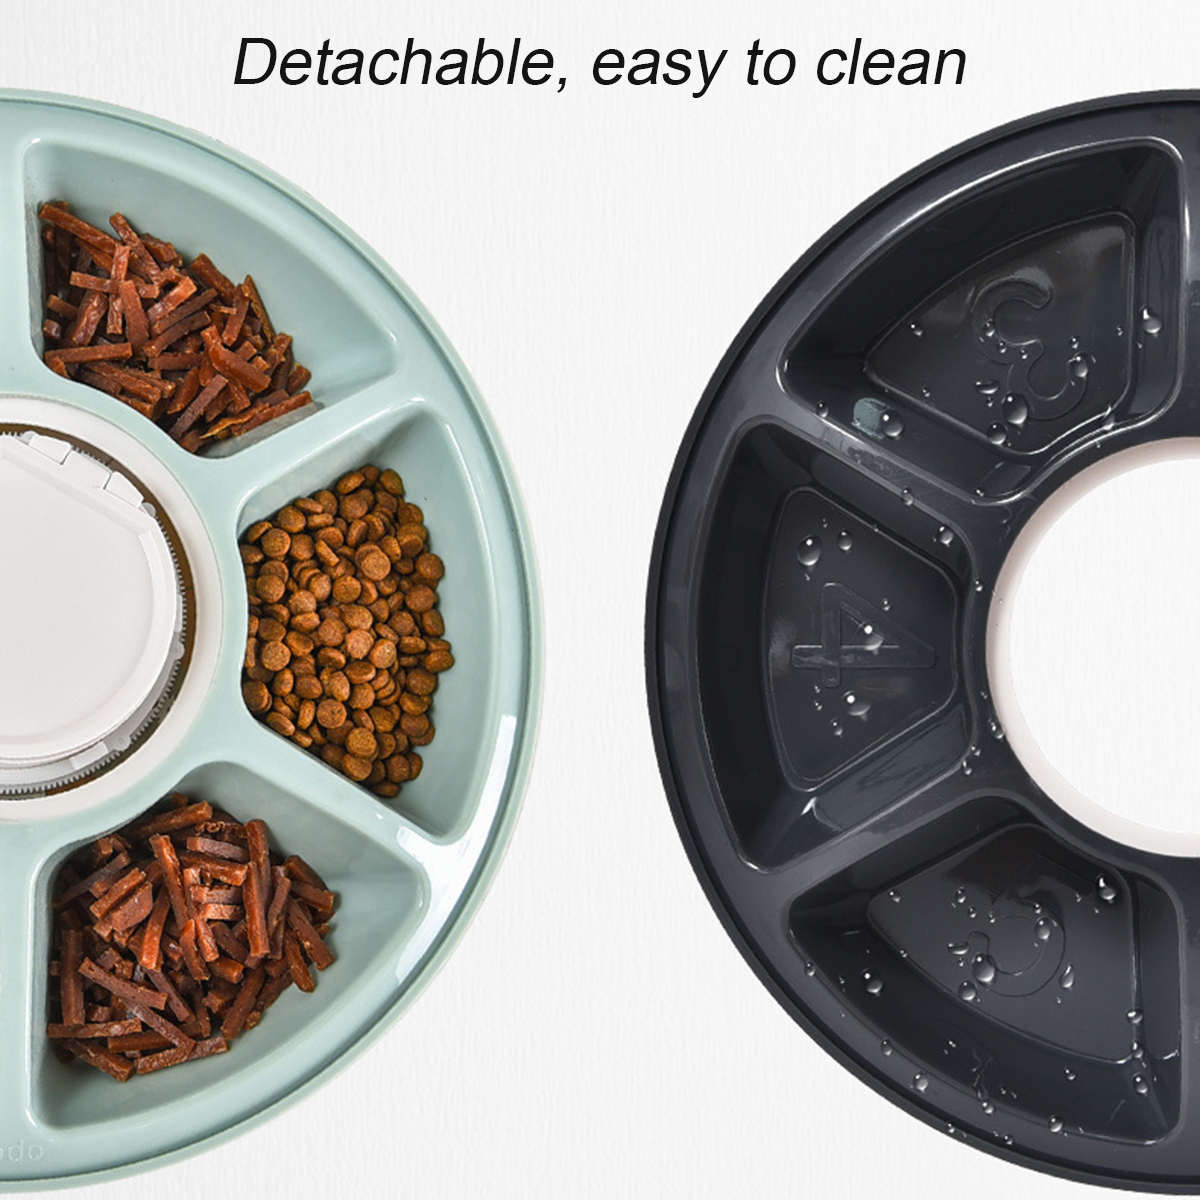 5-Meal-Automatic-Dog-and-Cat-Feeder-Dispenser-for-Dogs-Cats--Small-AnimalsWet--Dry-Food-Universal-Wi-1817273-4